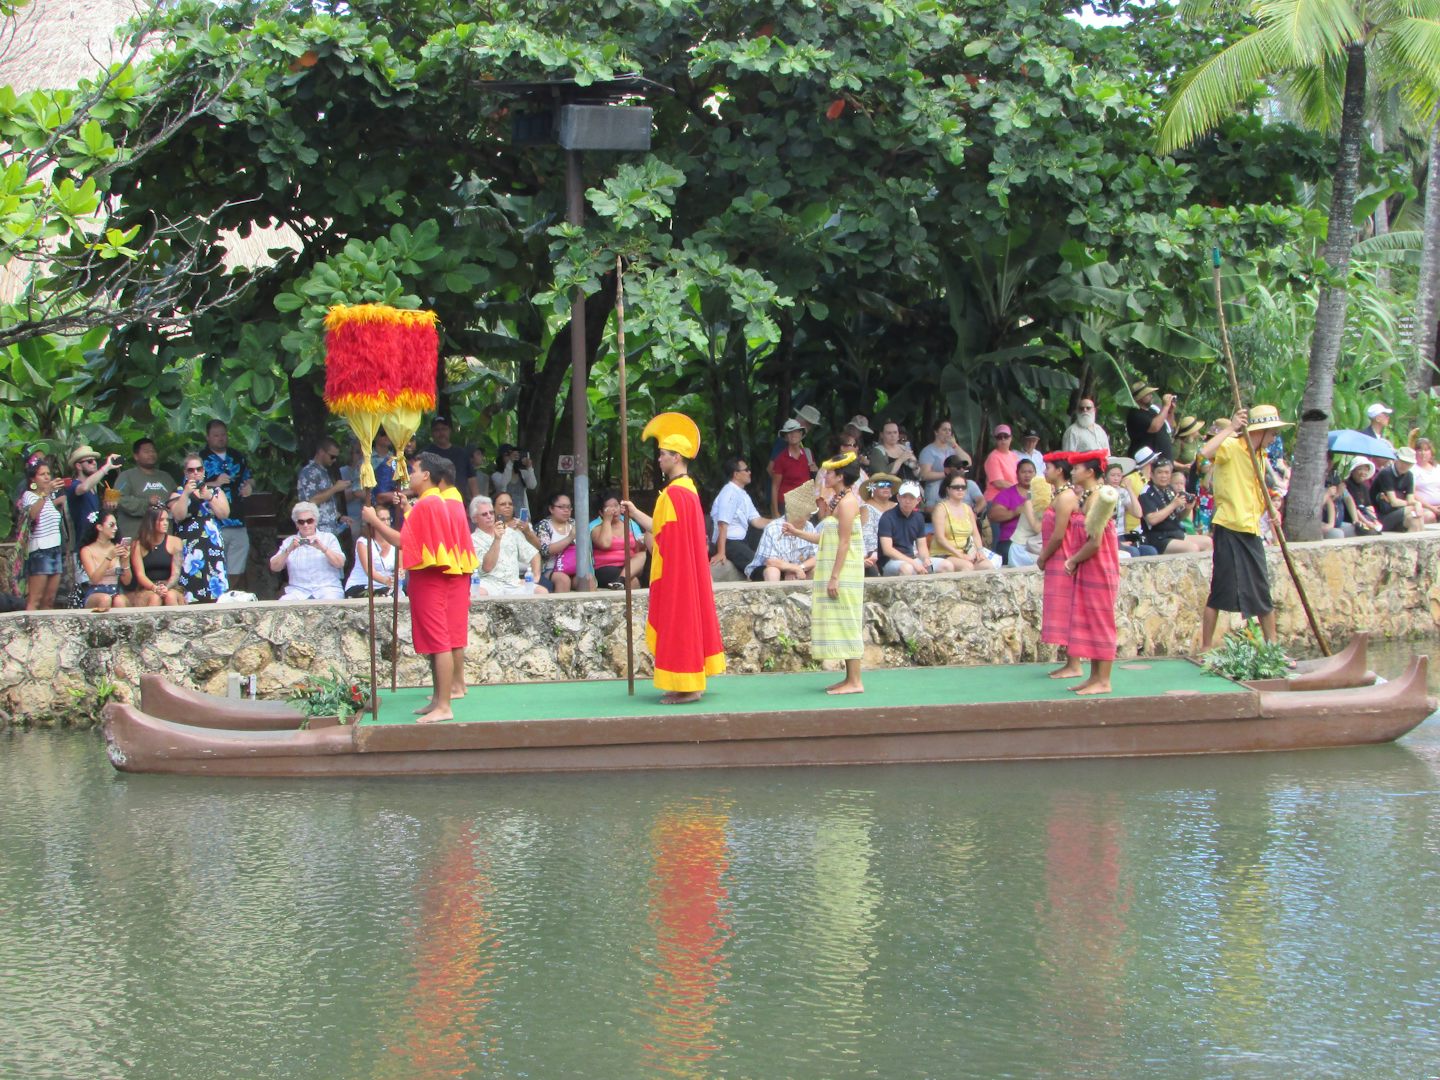 We went to the Polynesian cultural Center